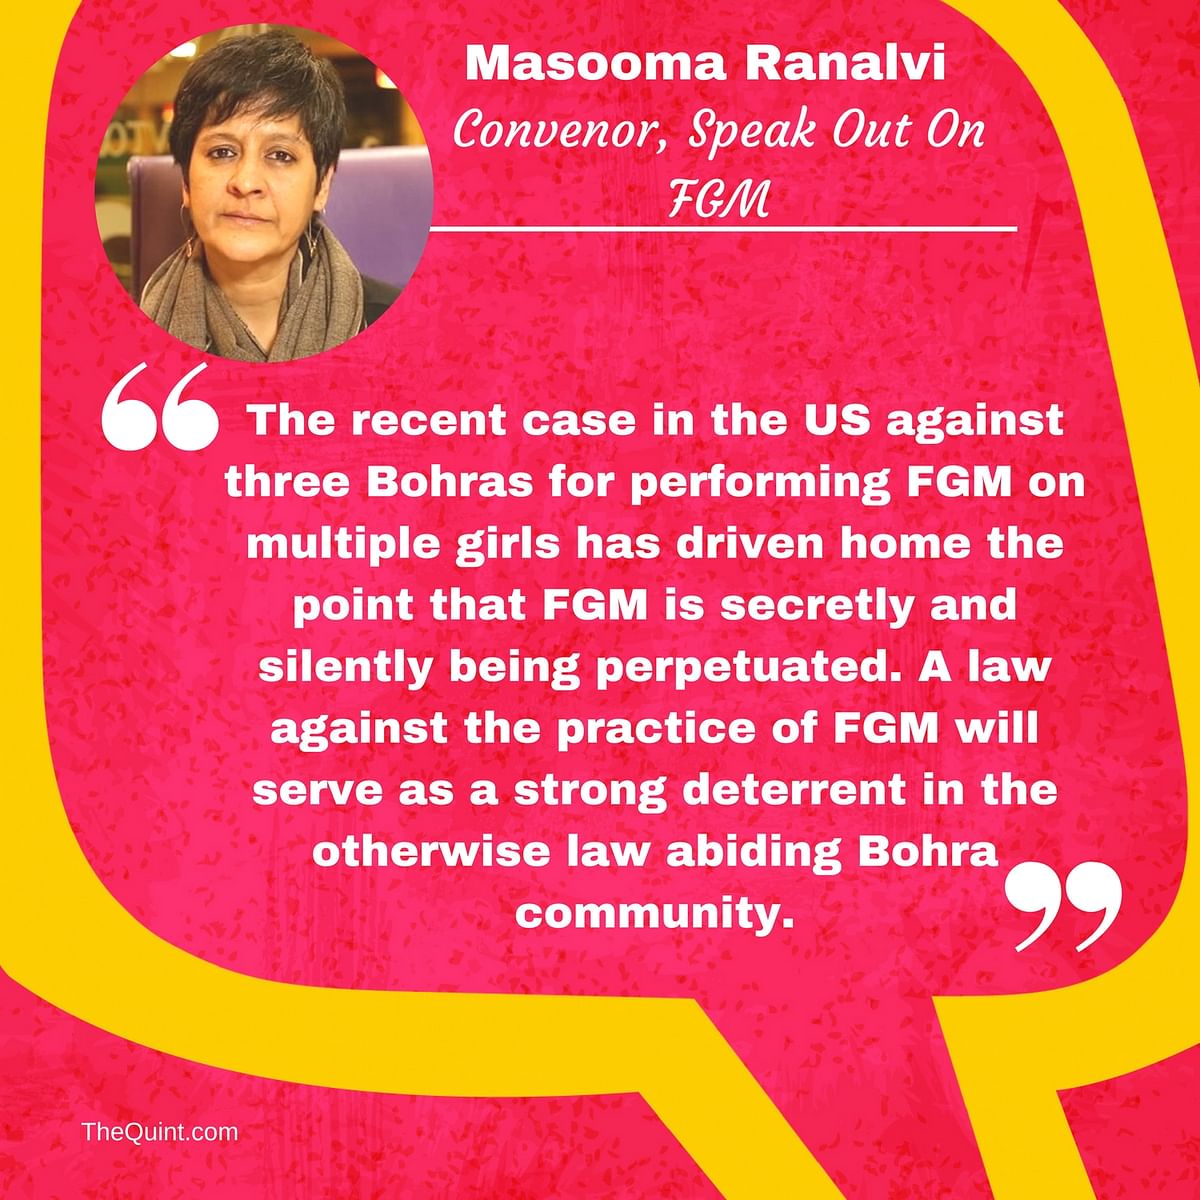 Maneka Gandhi had said that if the Bohras don’t stop FGM voluntarily, the government will bring in a law to ban it.